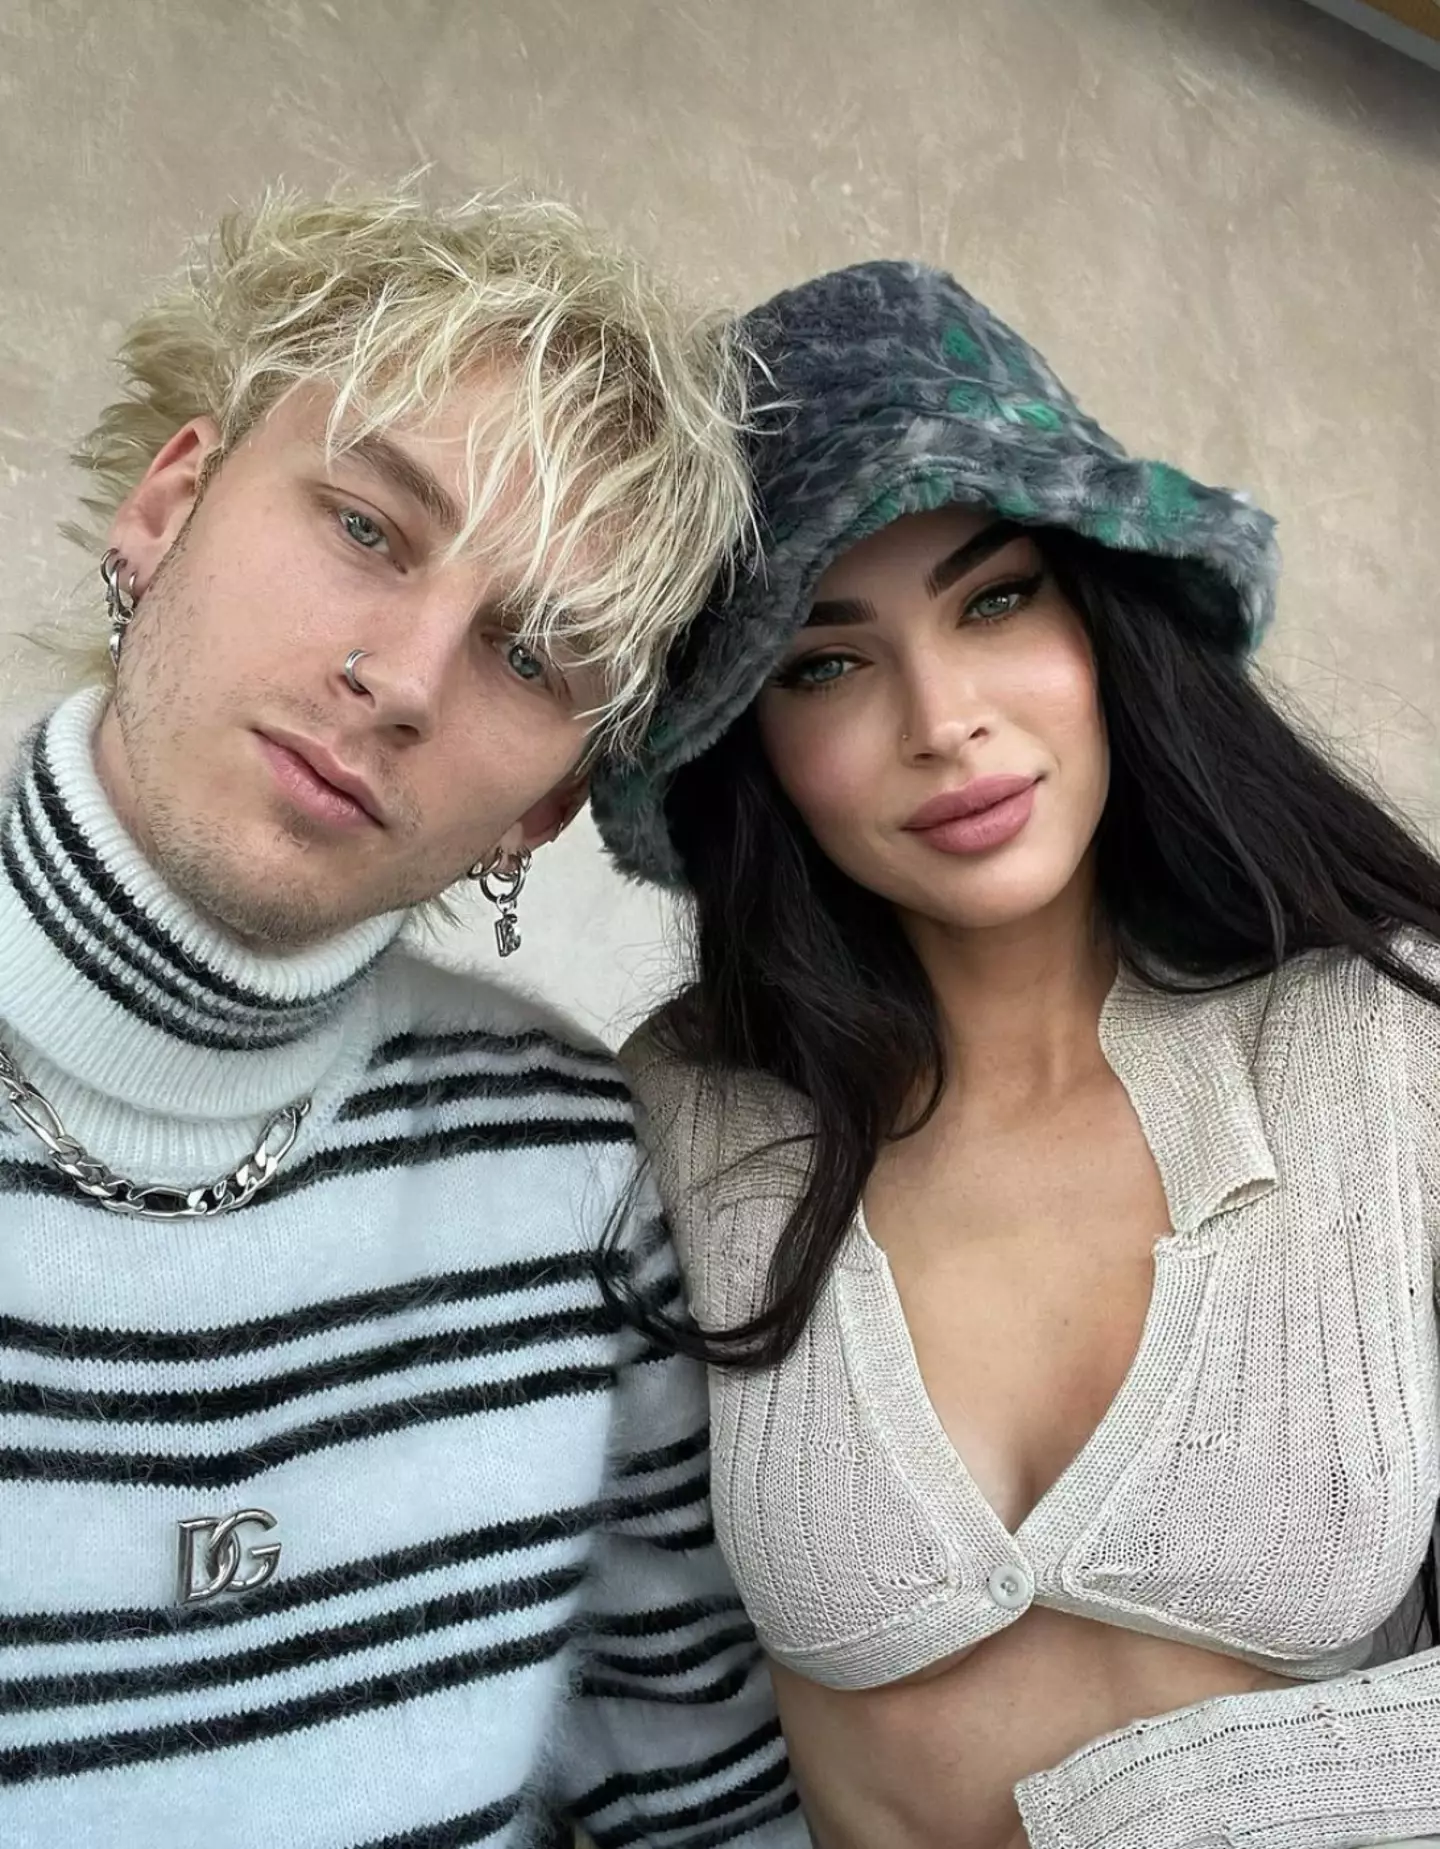 Rumours have been swirling that Megan and Machine Gun Kelly have split.